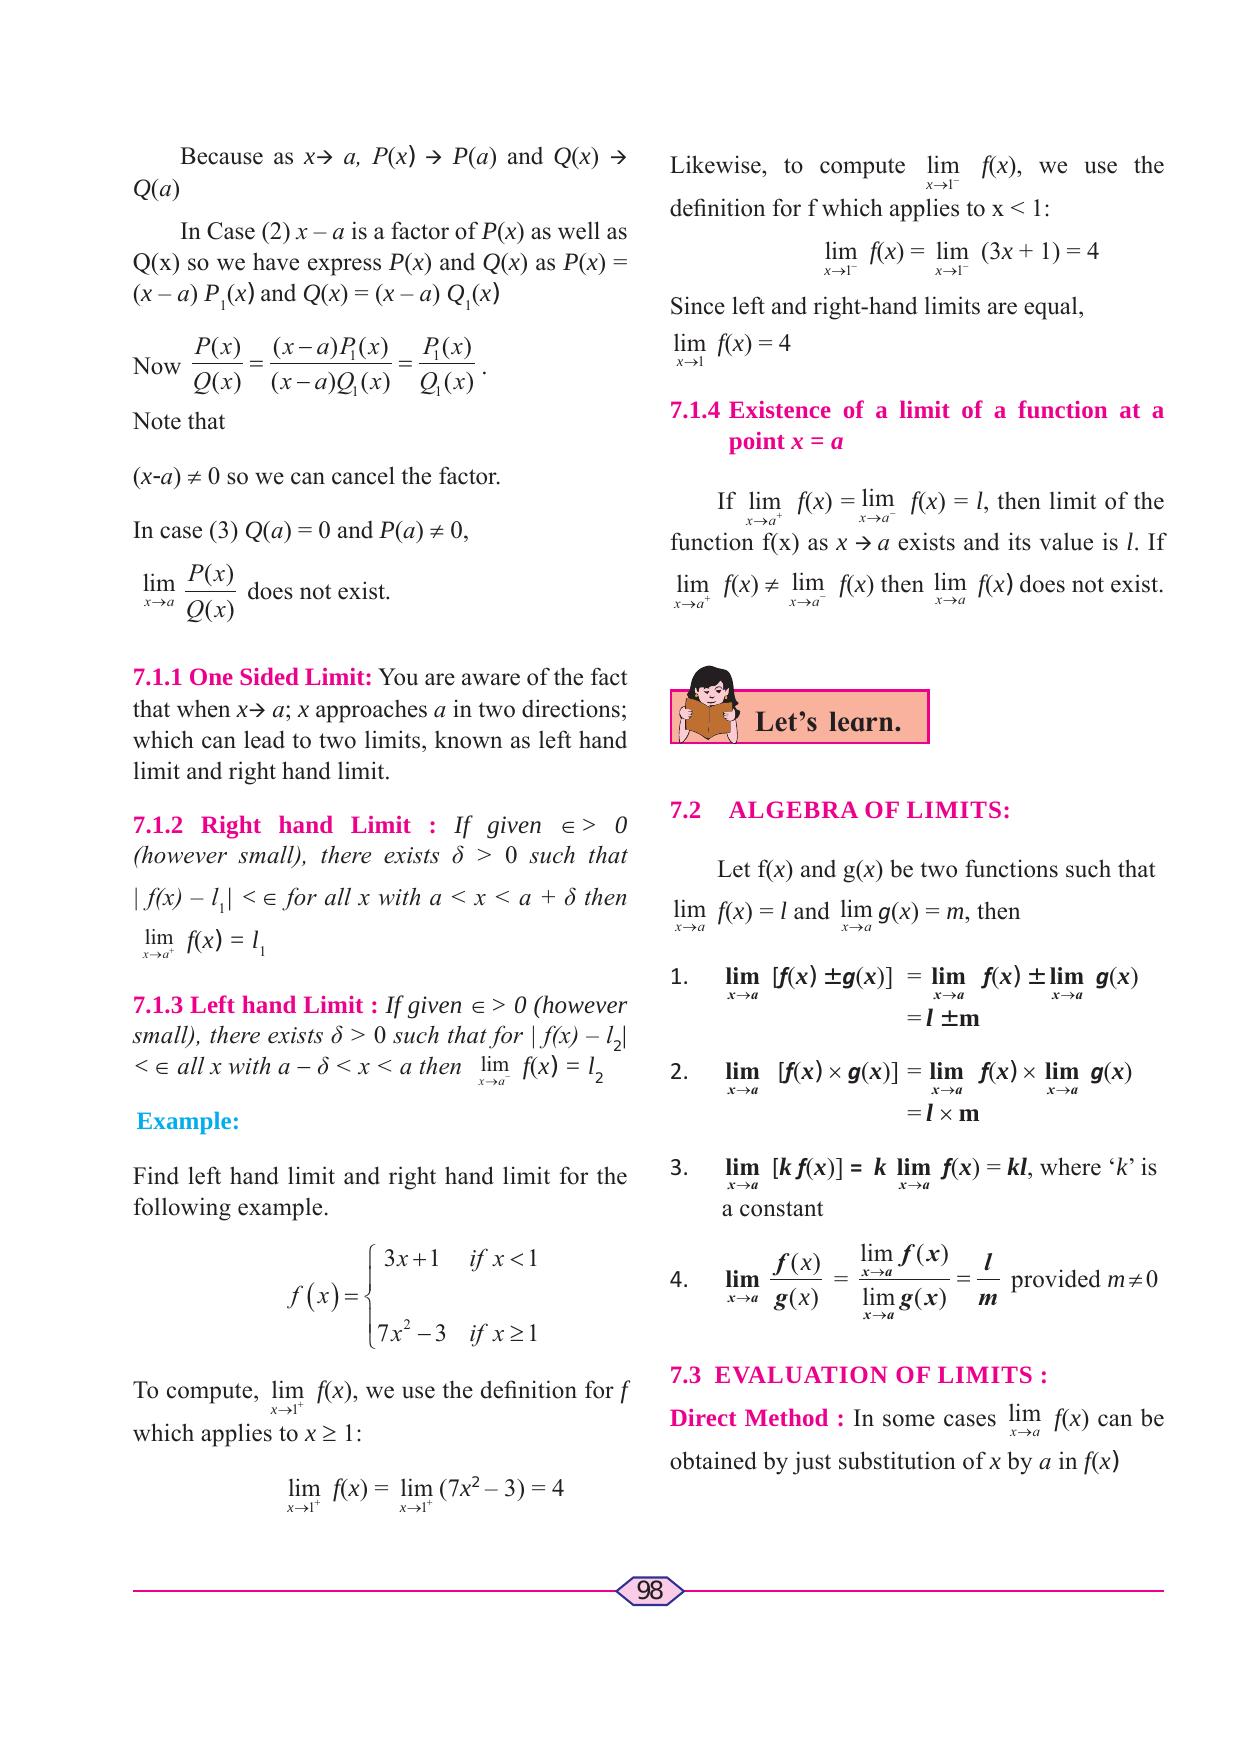 Maharashtra Board Class 11 Maths (Commerce) (Part 1) Textbook - Page 108